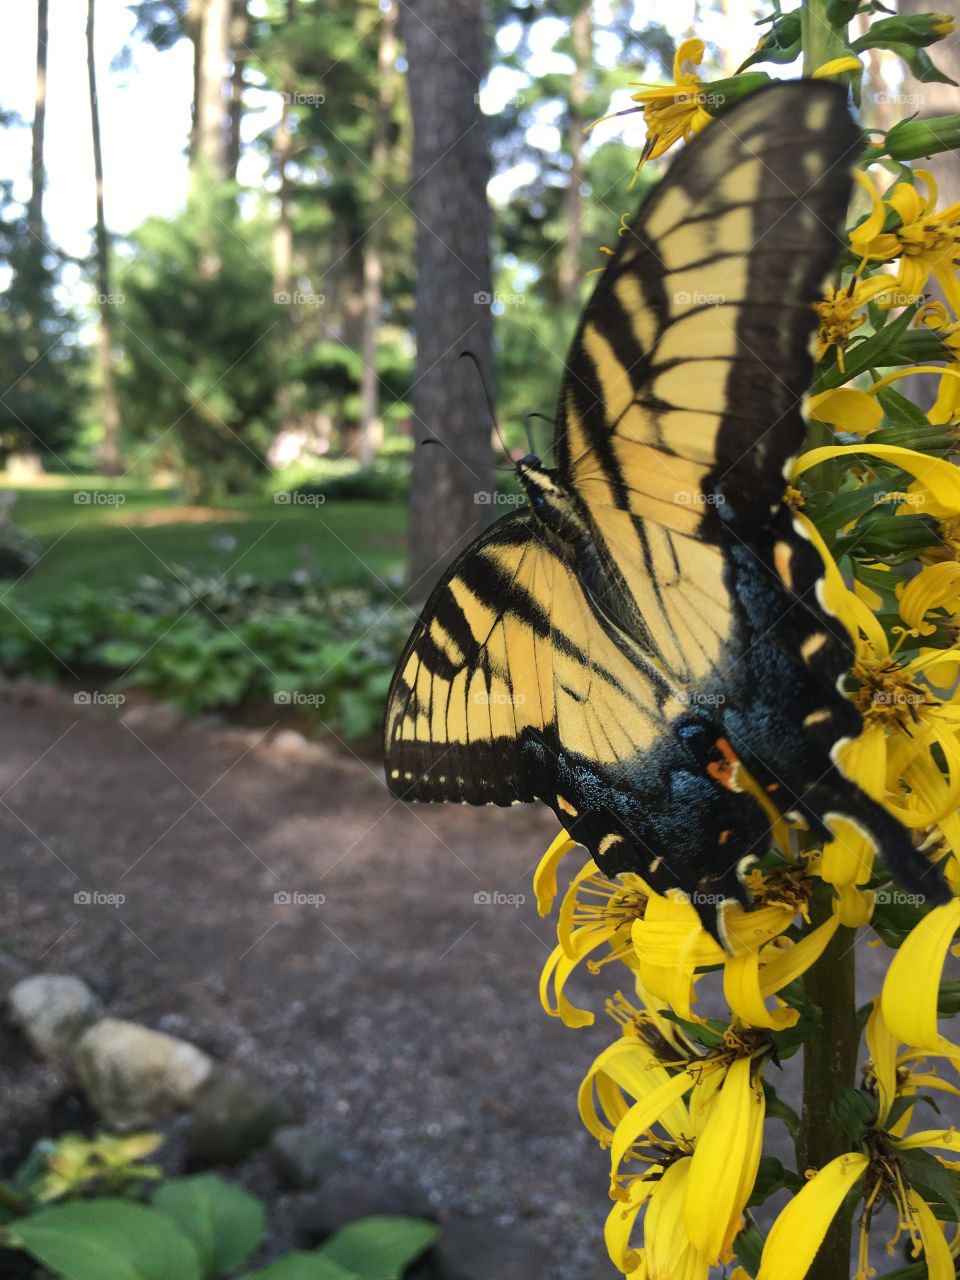 A yellow swallowtail butterfly I stumbled across while on a walk at Munsinger Gardens in Minnesota. I got quit a few shots, but this one is my favorite. 